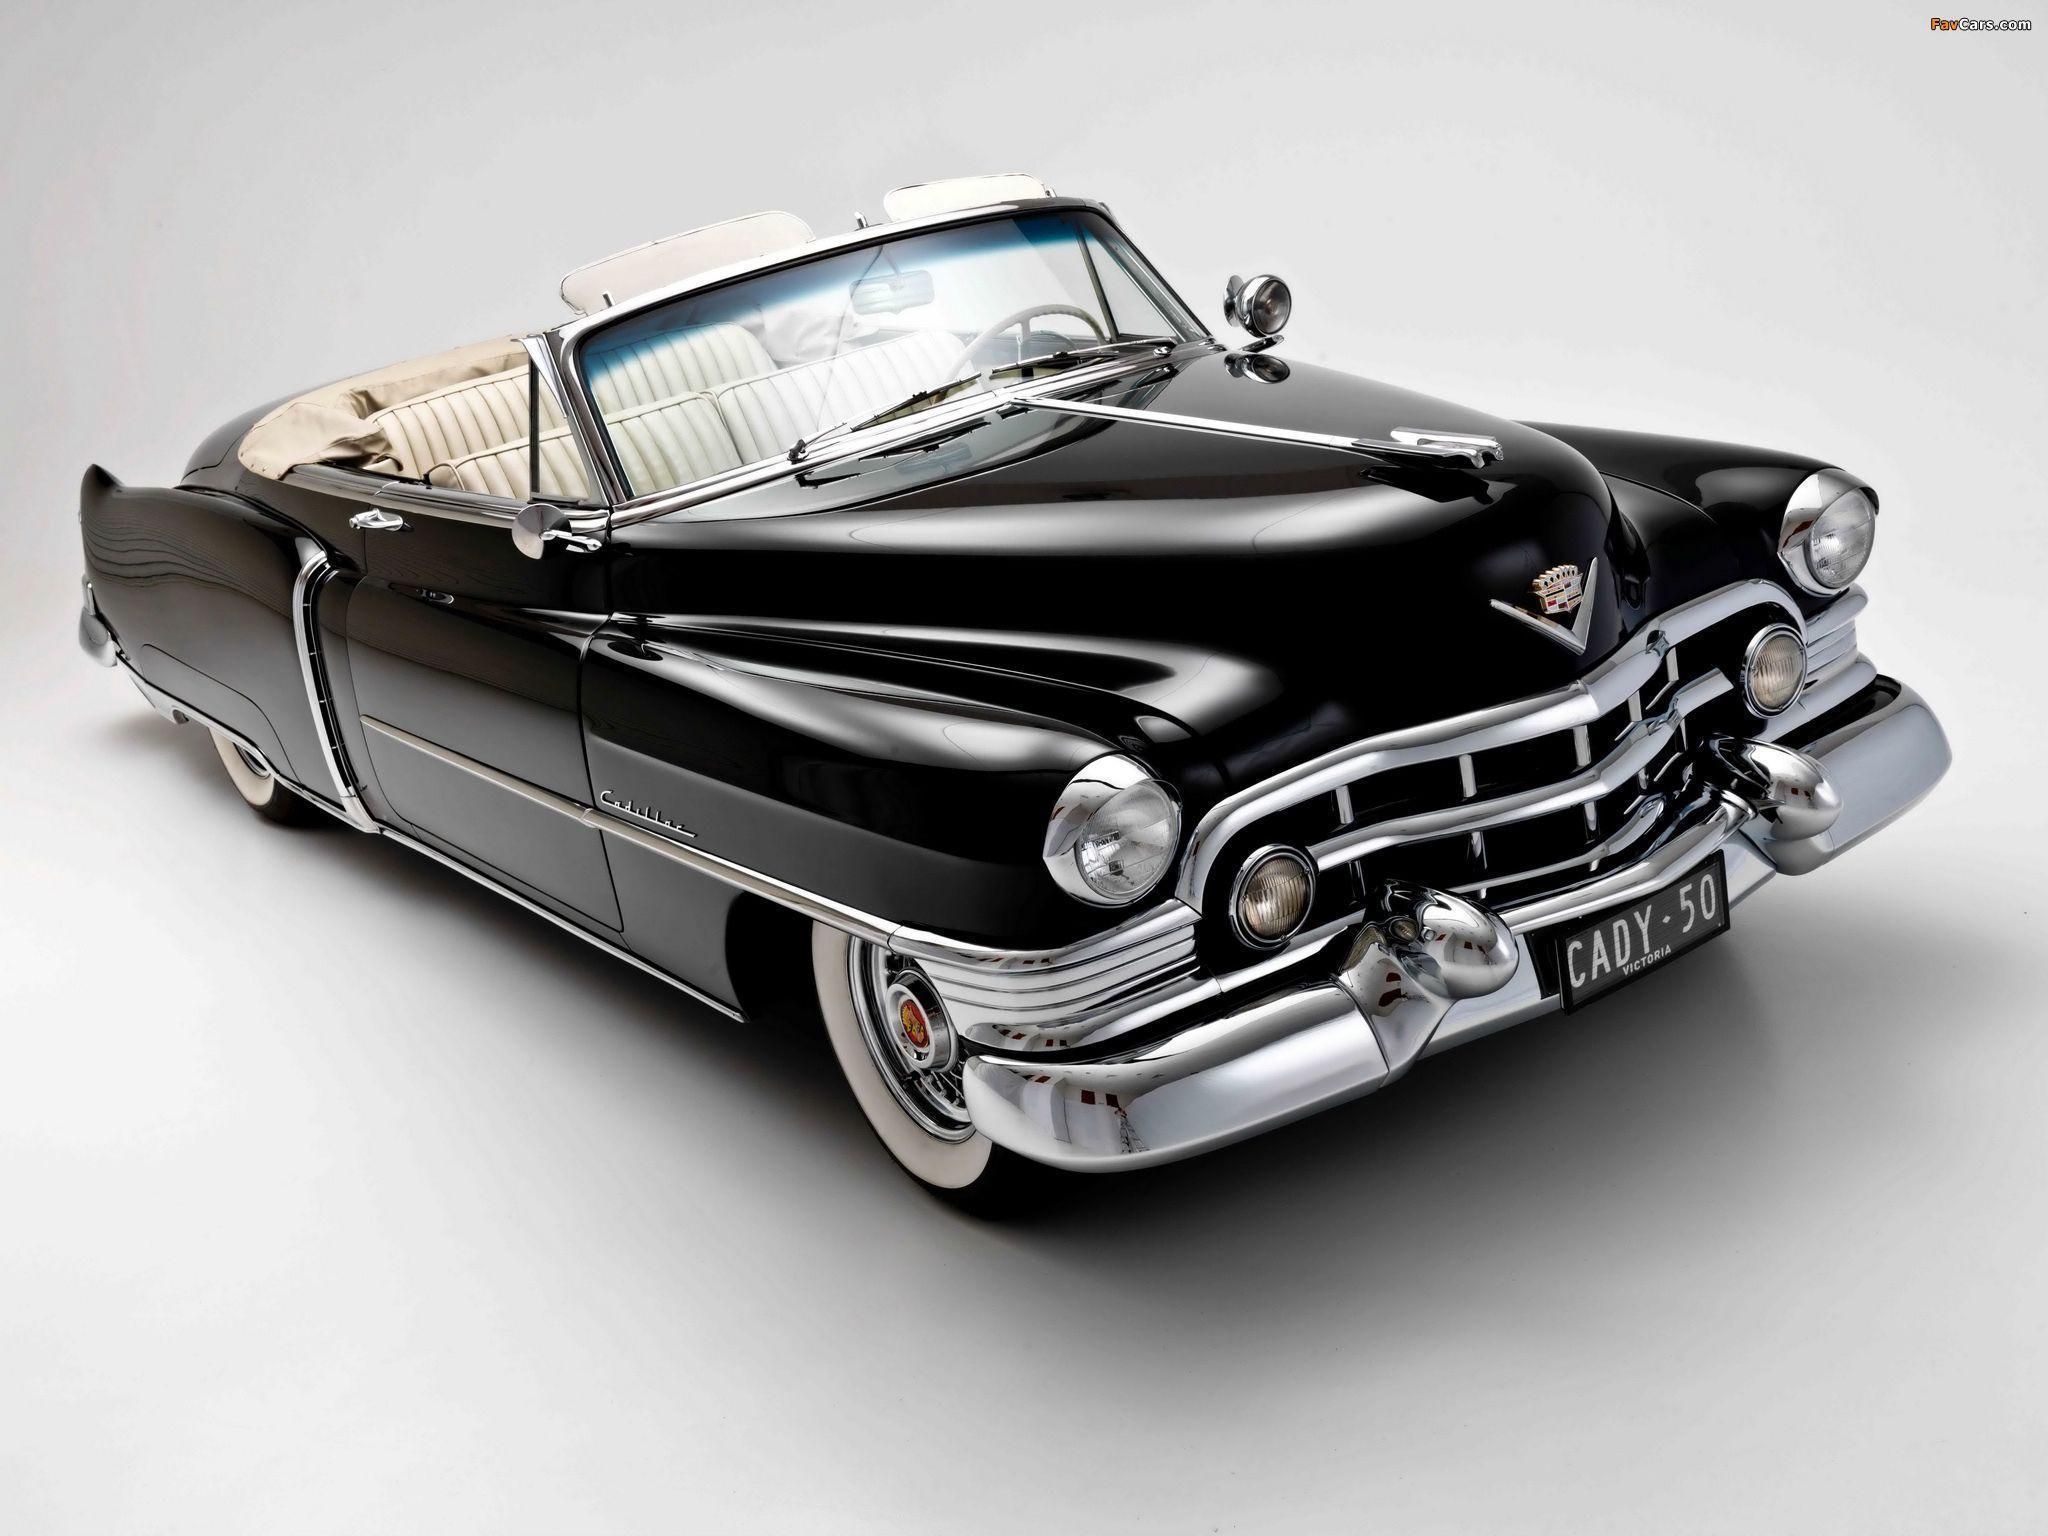 Wallpaper Of Cadillac Sixty Two Convertible 1950